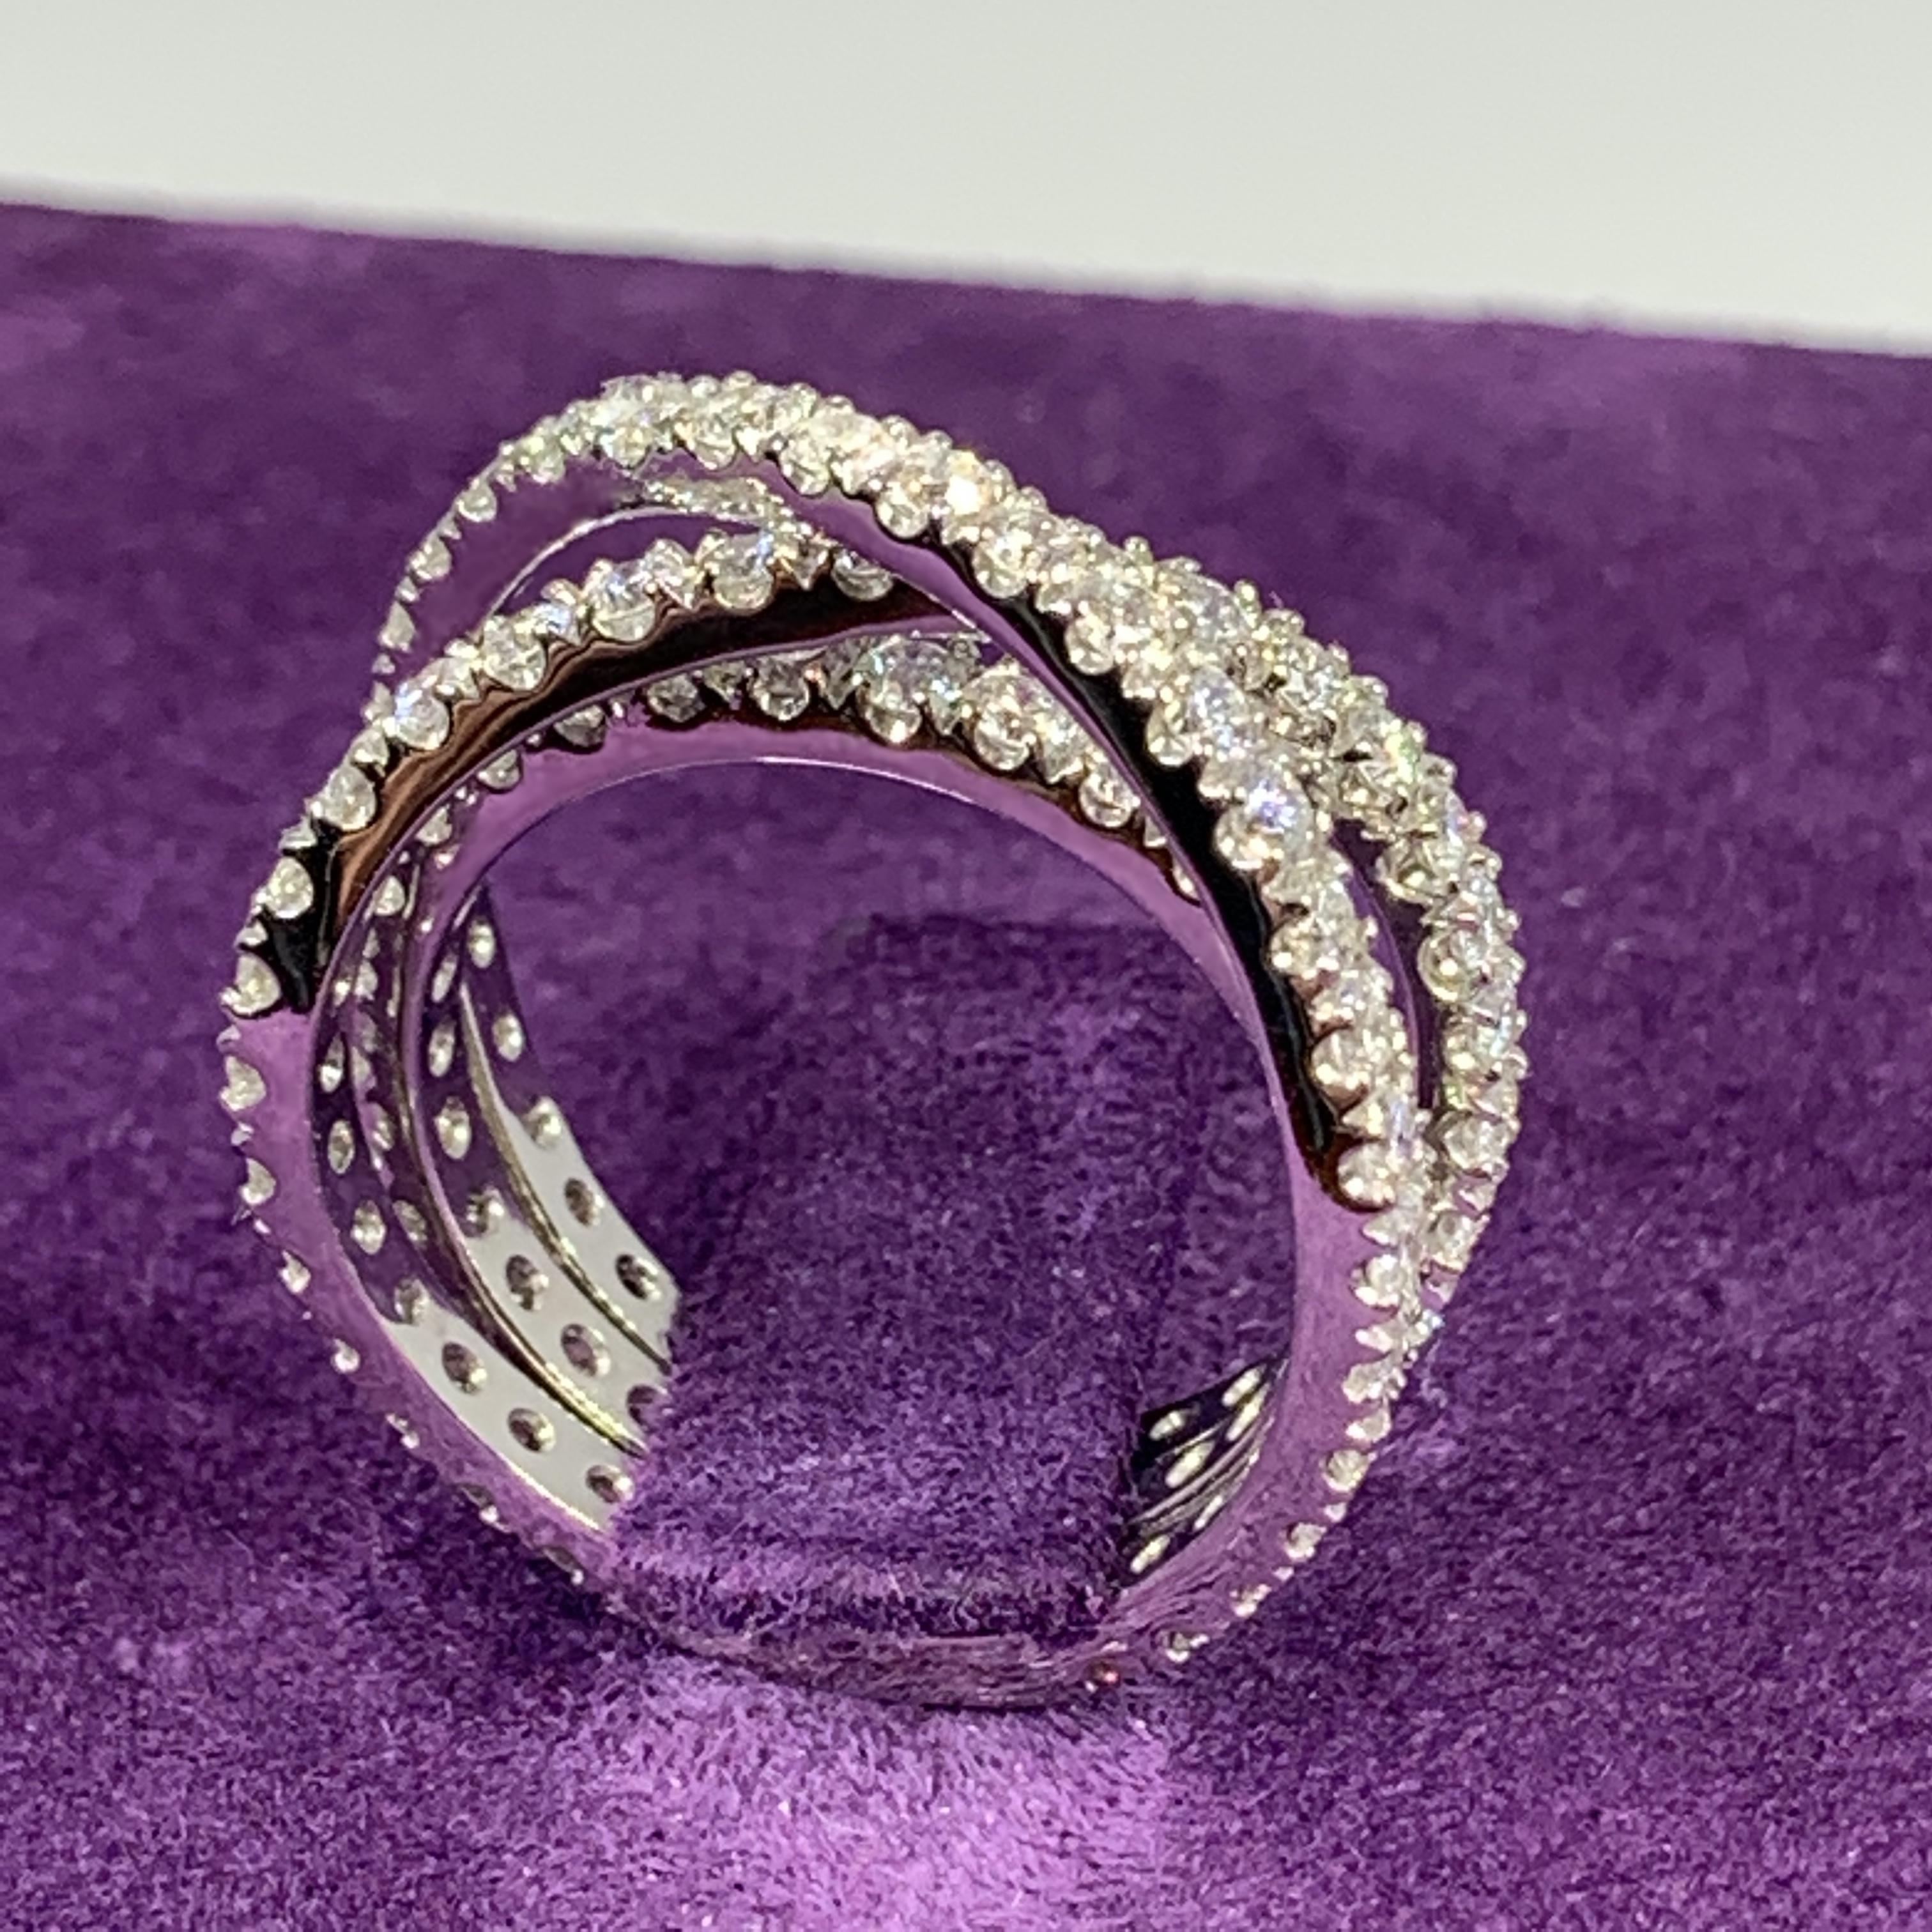 Brilliant Cut Transformable, Entwined 18K White Gold Band Rings with 3 carats of Diamonds For Sale